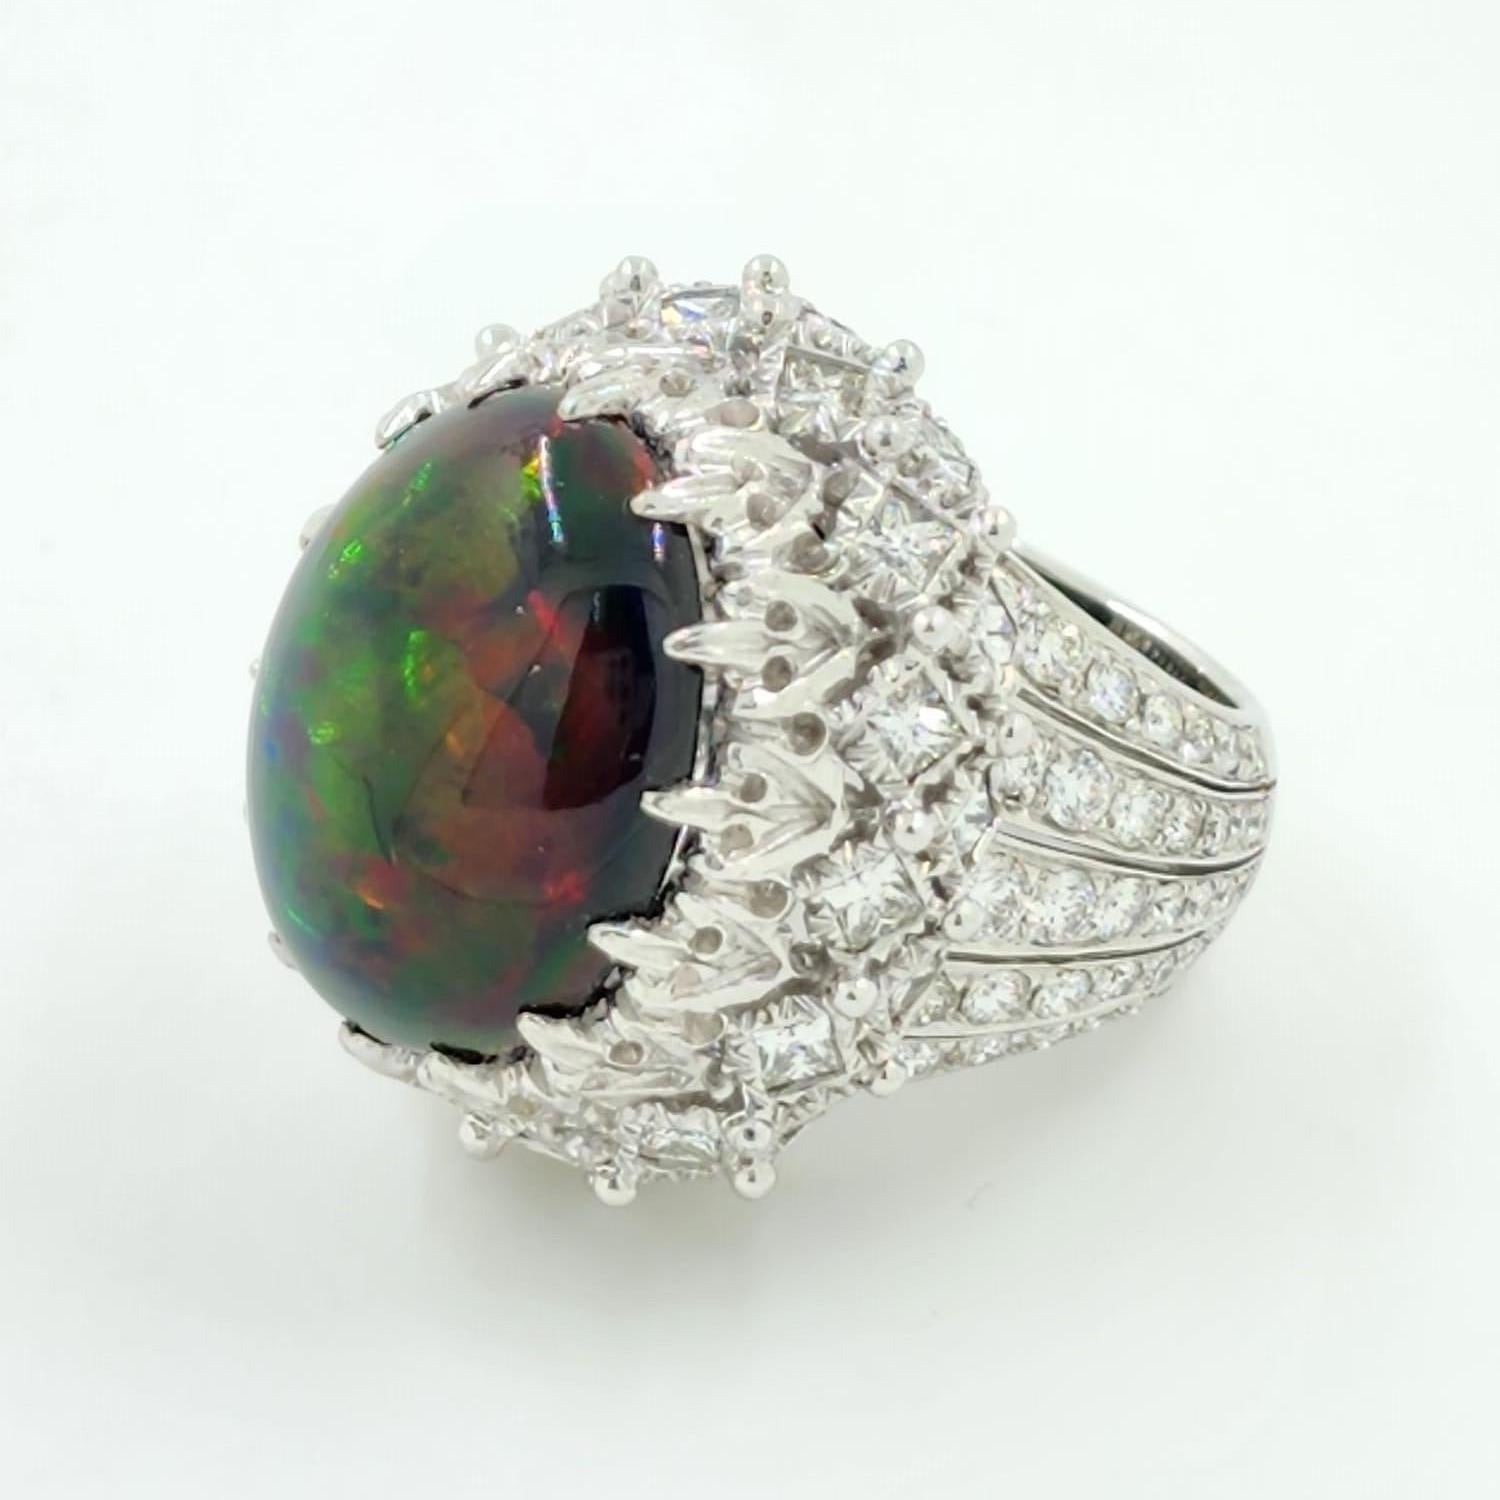 Introducing our stunning black opal ring, a true work of art that combines exquisite design with the natural beauty of a 12.93 carat black opal. The opal exhibits a captivating multi-color pattern that ranges from pigeon blood red to green and